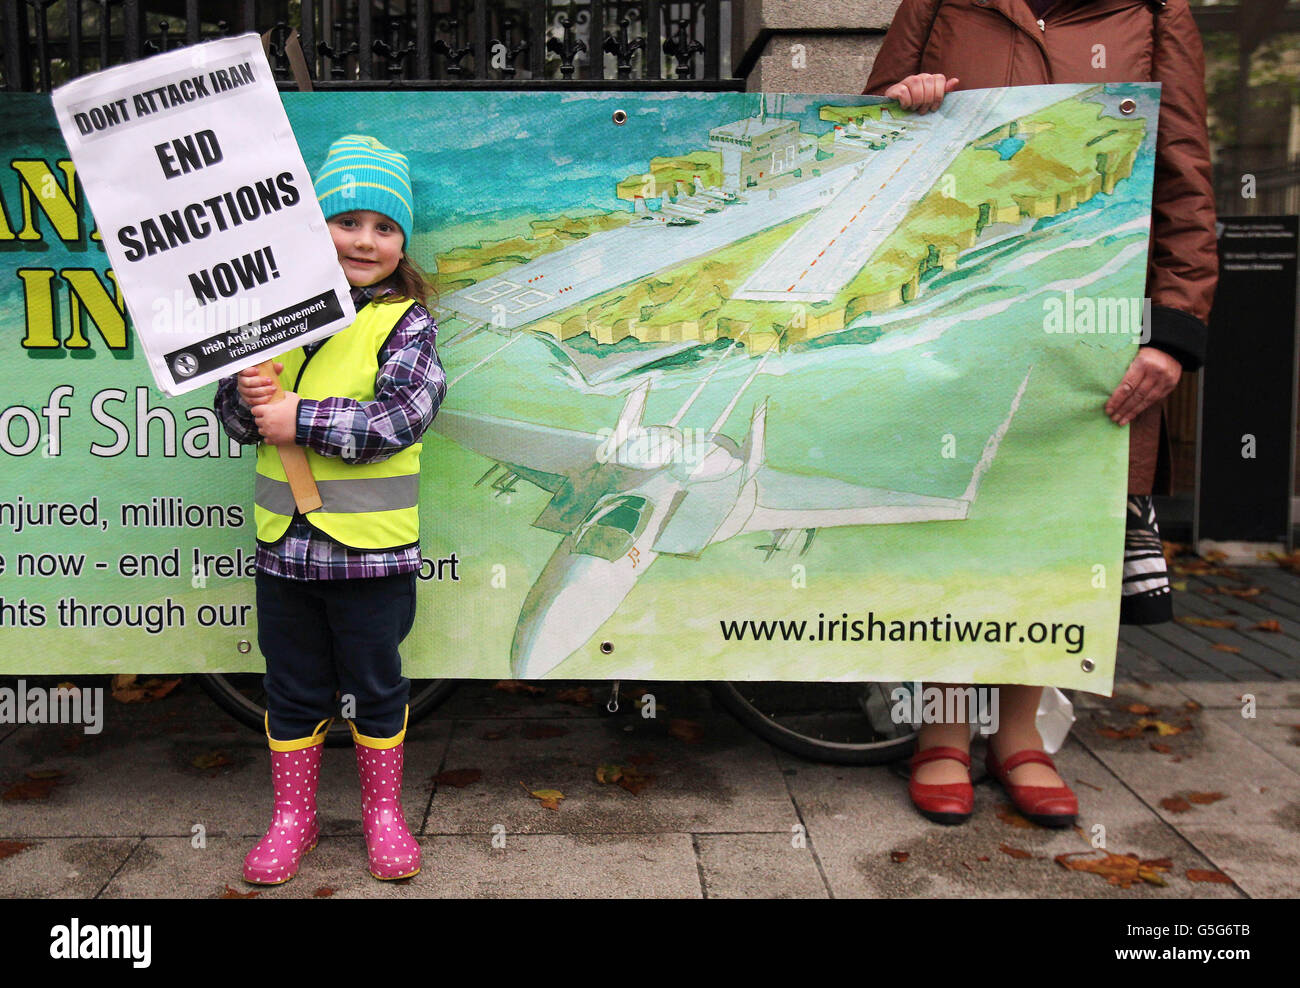 Four year old Freya (surname not given) holds a picket sign appealing for an end to sanctions on Iran during a protest as part of the launch of new booklet, Shannon Airport, War and Renditions, in Dublin today. Stock Photo